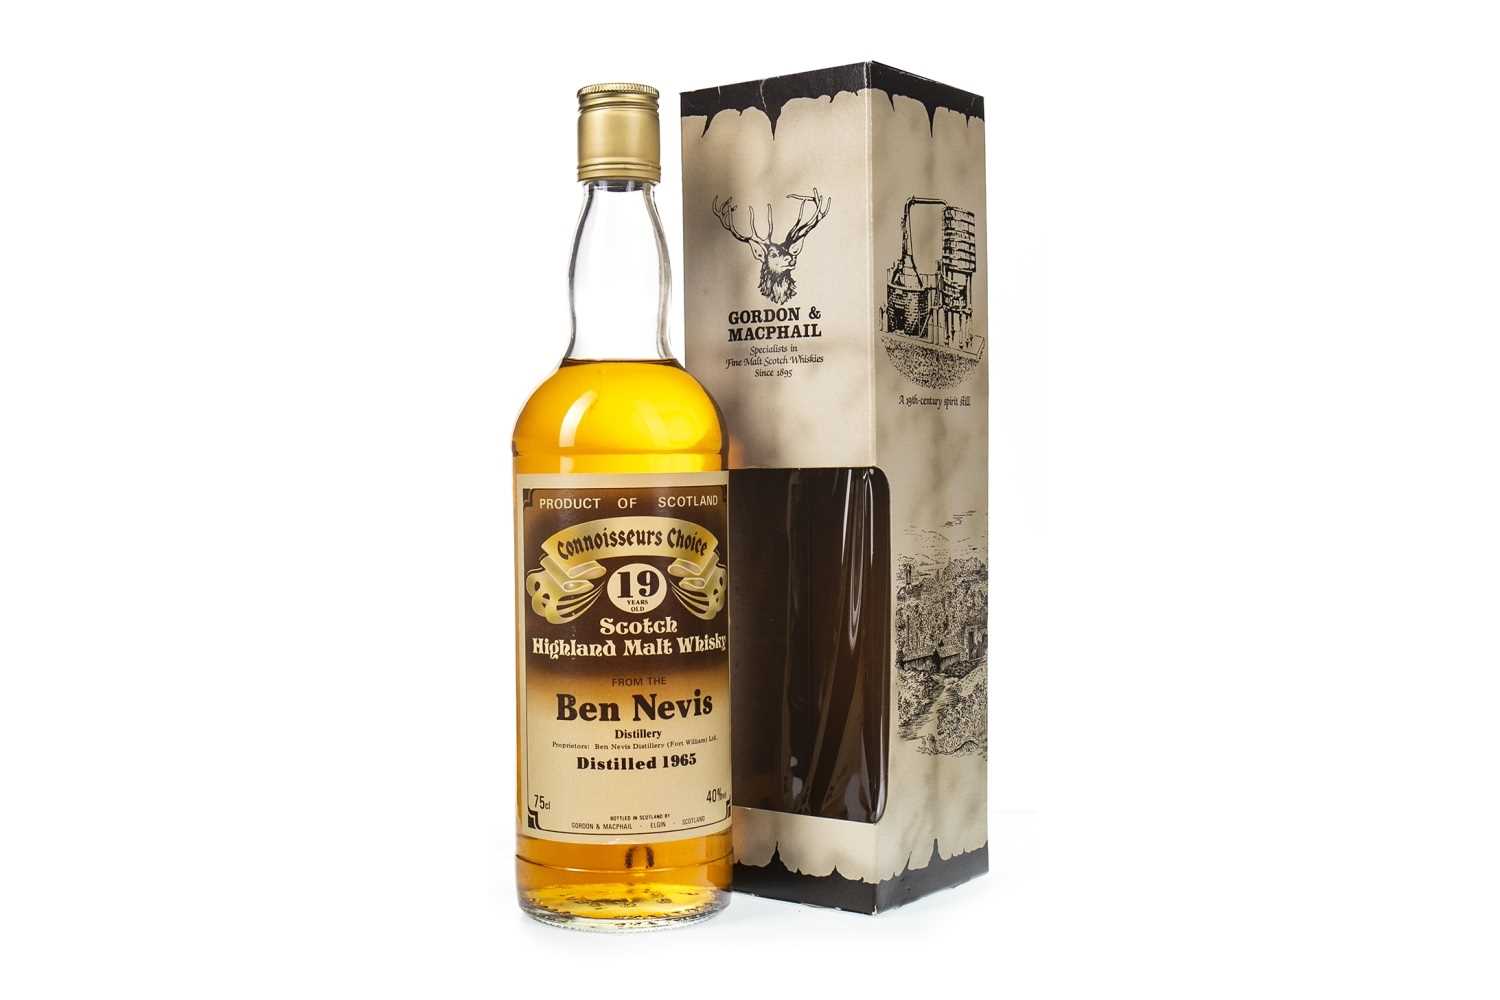 Lot 253 - BEN NEVIS 1965 CONNOISSEURS CHOICE 19 YEARS OLD